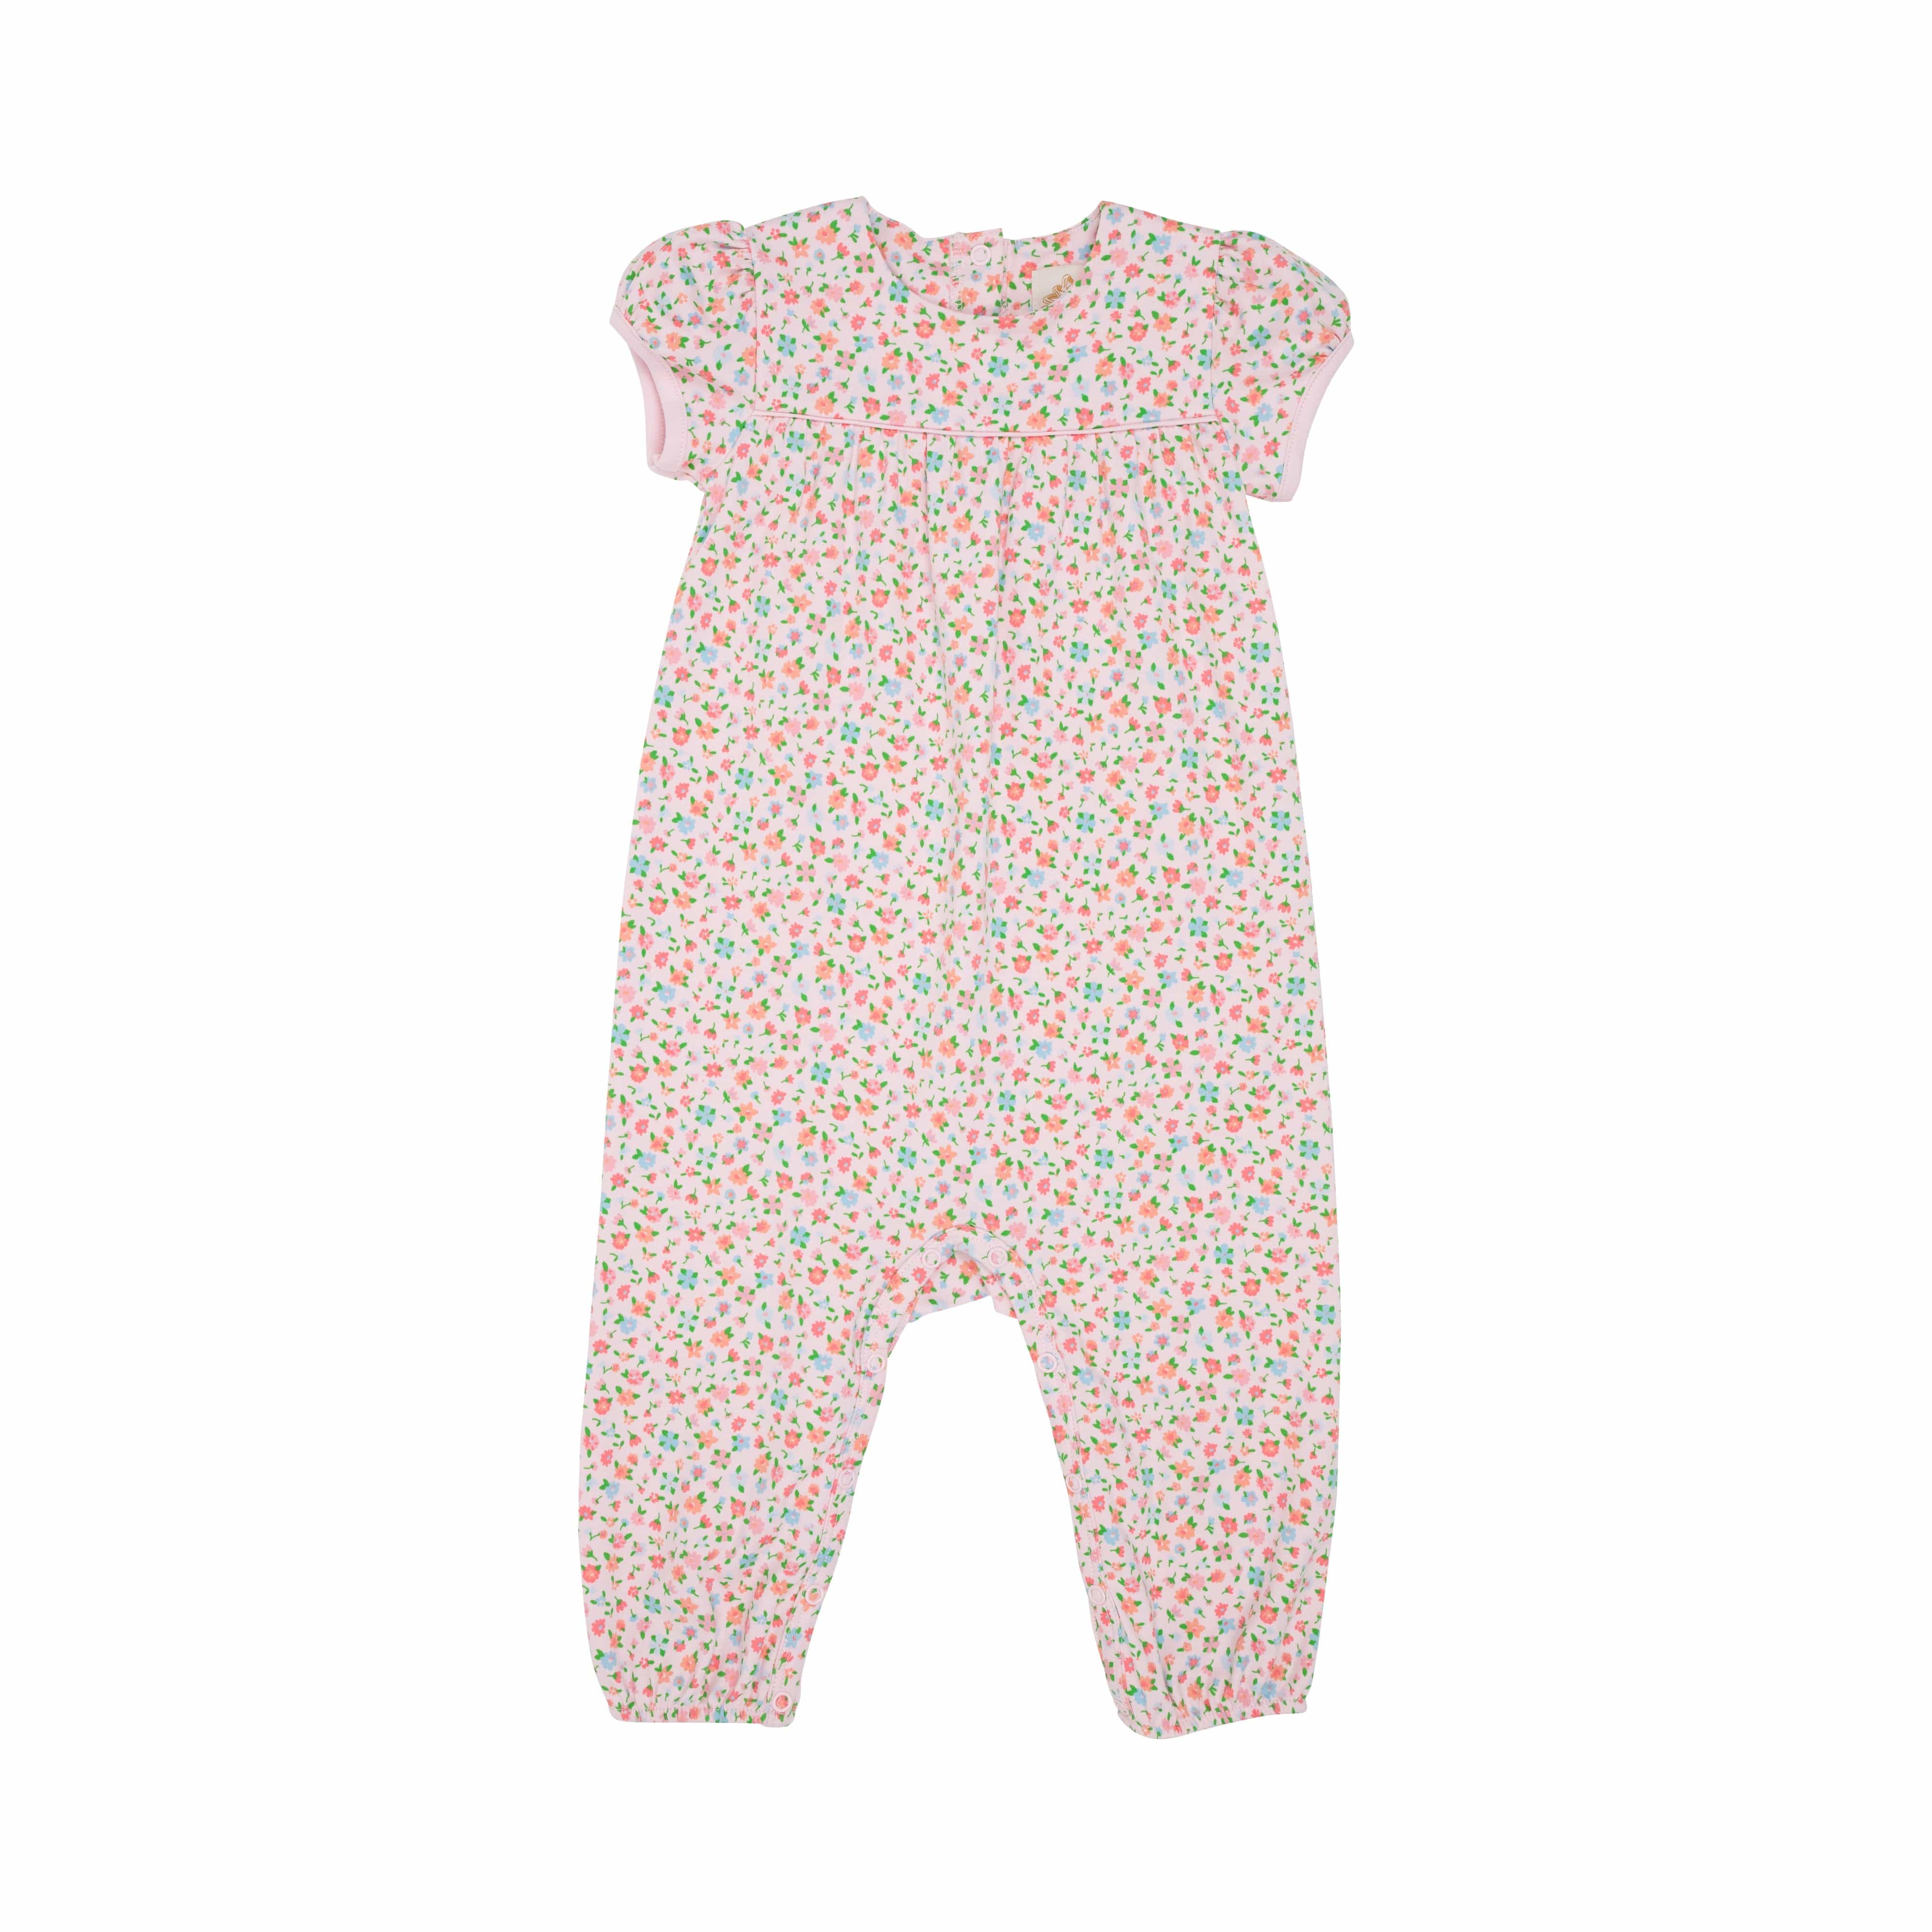 Beaufort Bonnet Company Beaufort Bonnet Company Penny's Playsuit - Little Miss Muffin Children & Home